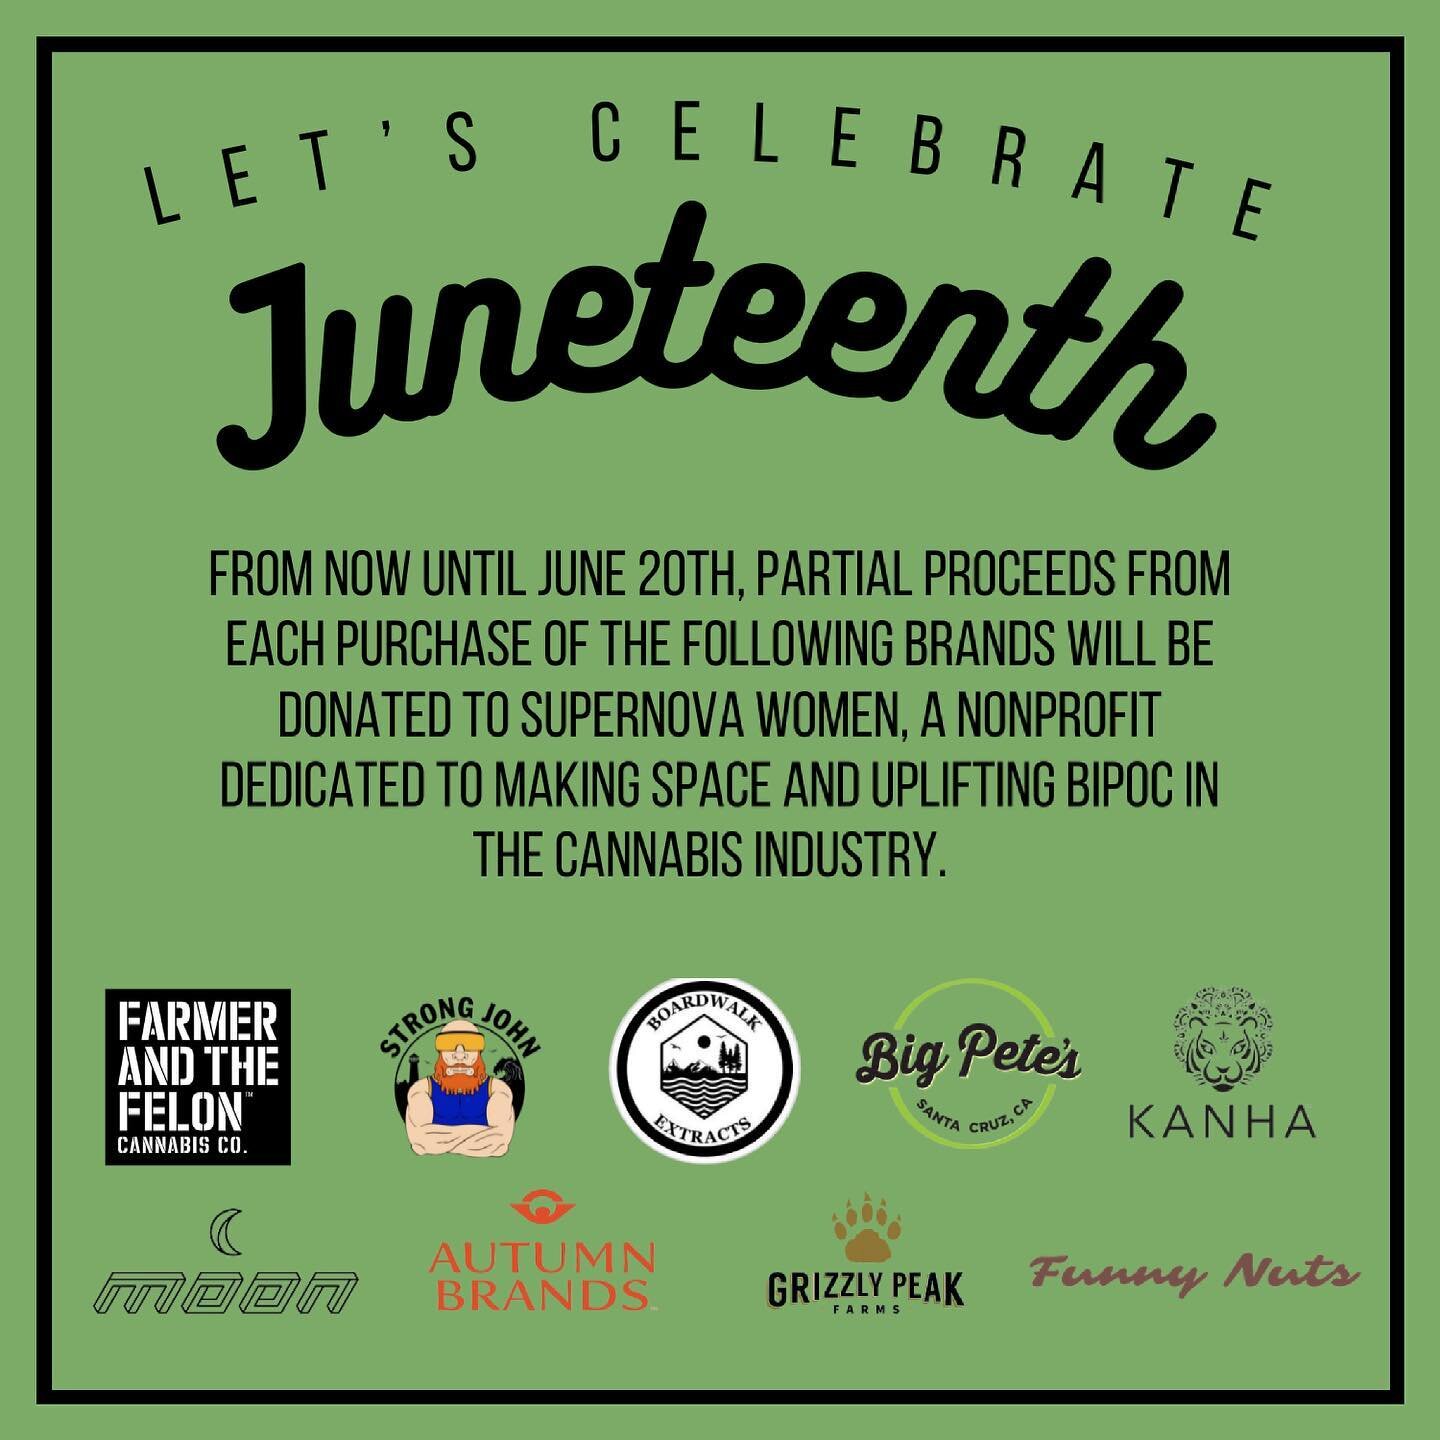 Let&rsquo;s celebrate our first Juneteenth together! This is the first year Juneteenth is being recognized as a federal holiday, commemorating the end of slavery in 1865. Stop by any time today through June 20th to join the cause! Specials will be ru